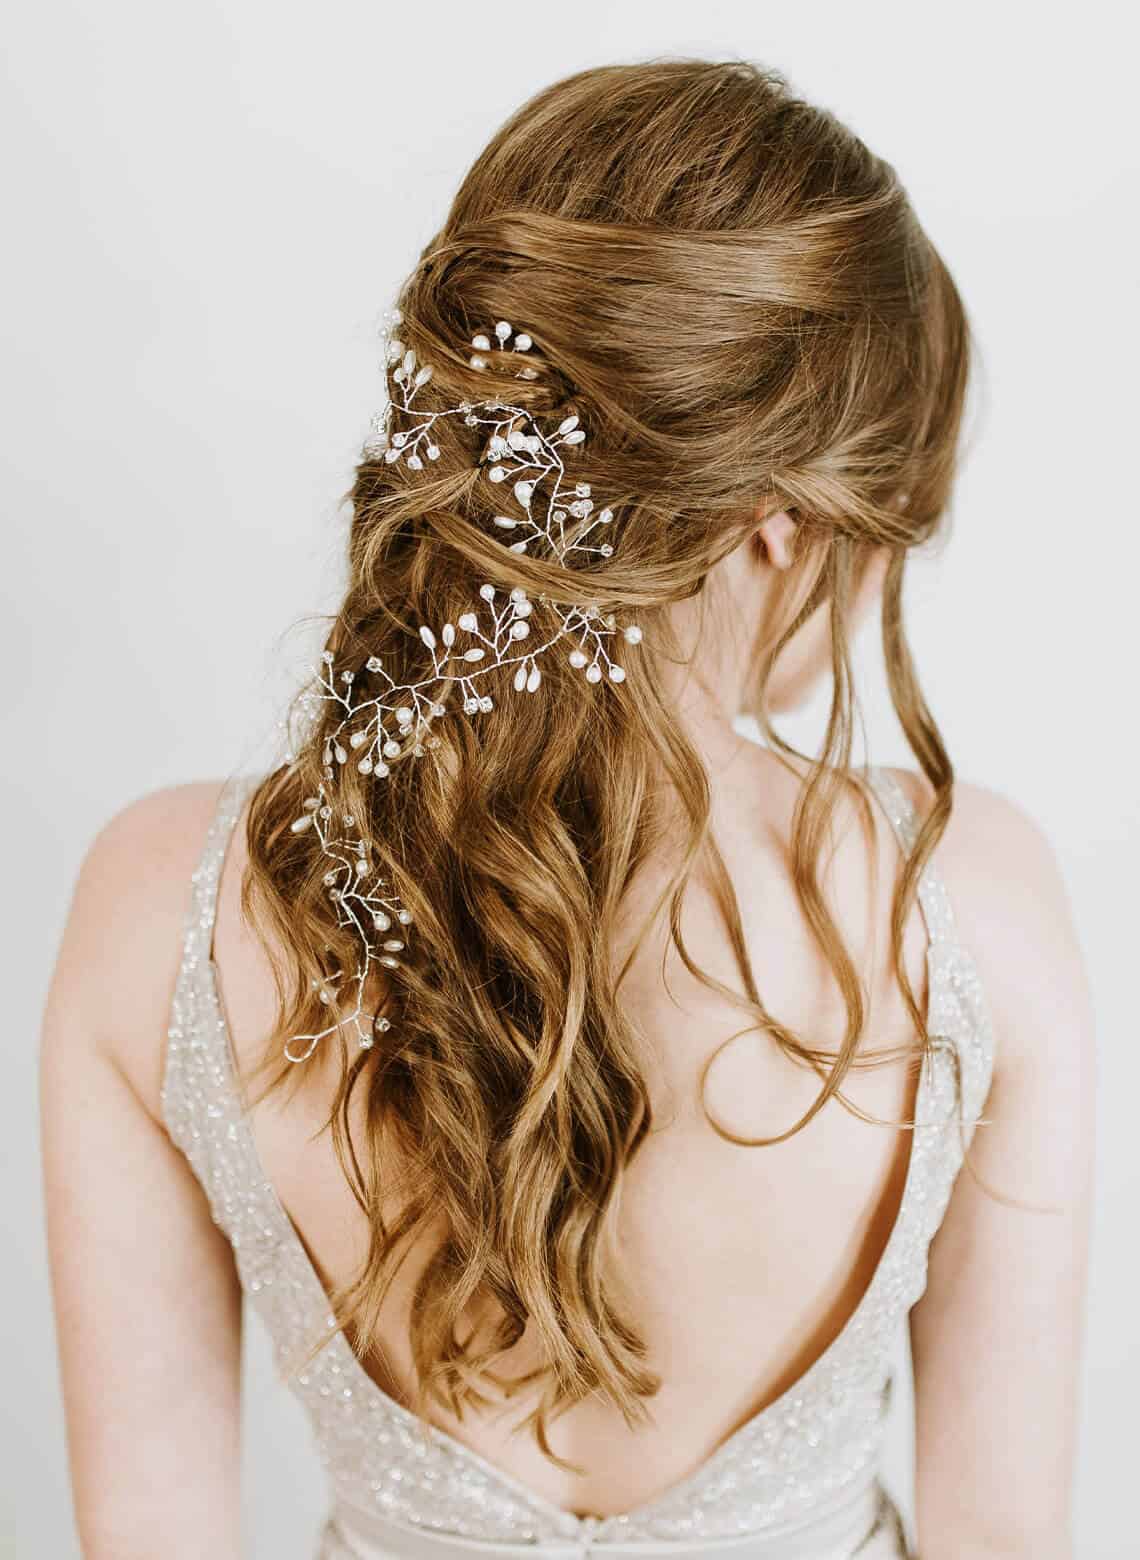 woman with wavy hair and accessories